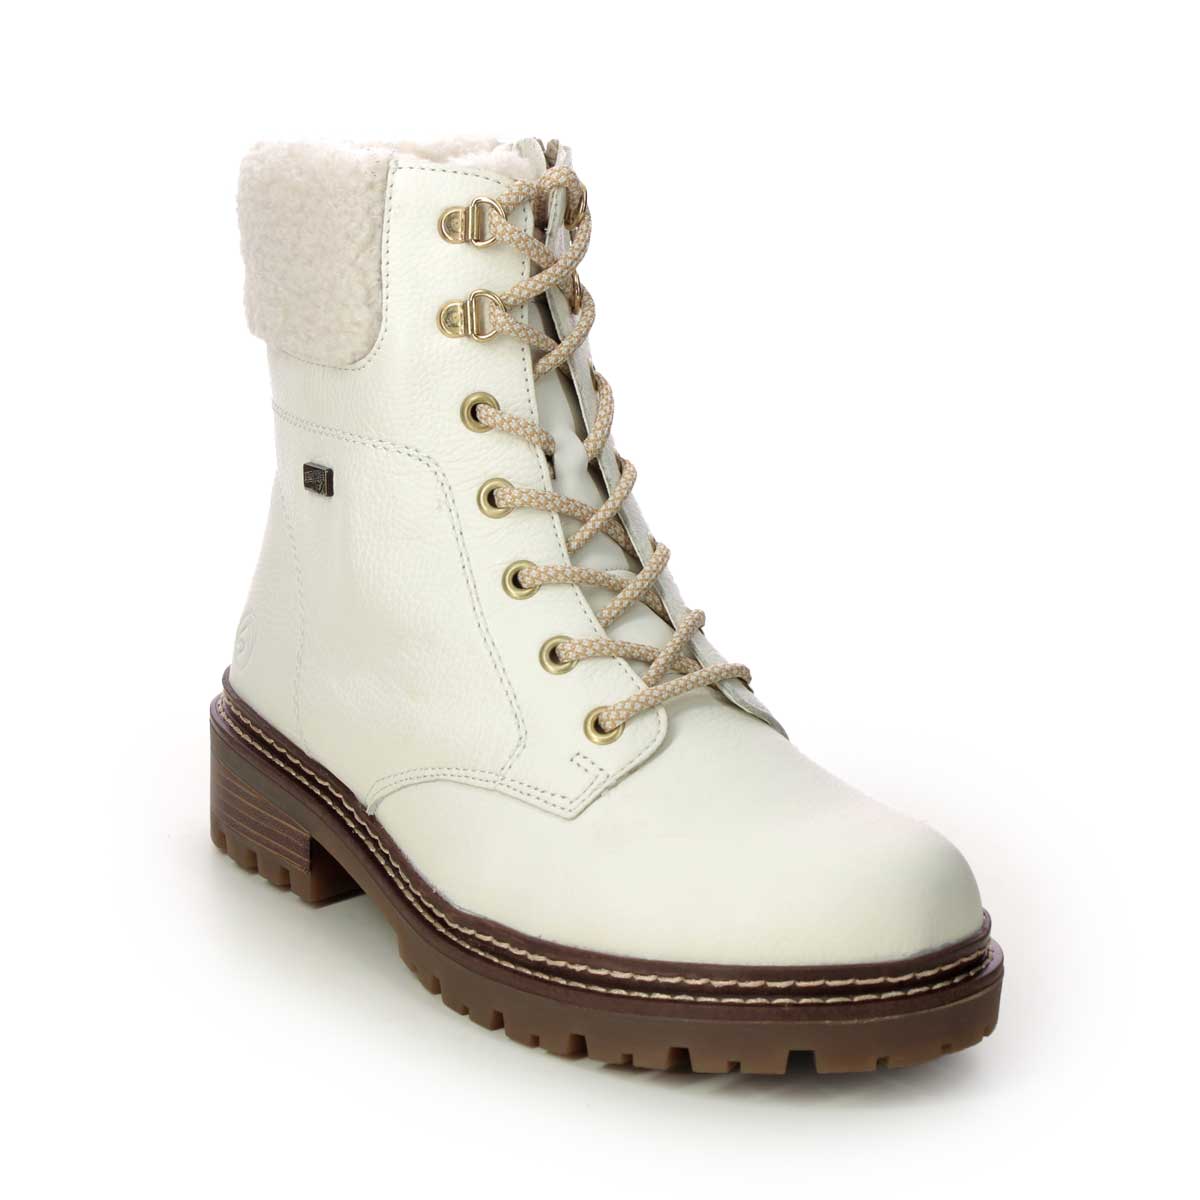 Remonte Astra Teddy Tex White Leather Womens Winter Boots D0B74-81 In Size 37 In Plain White Leather